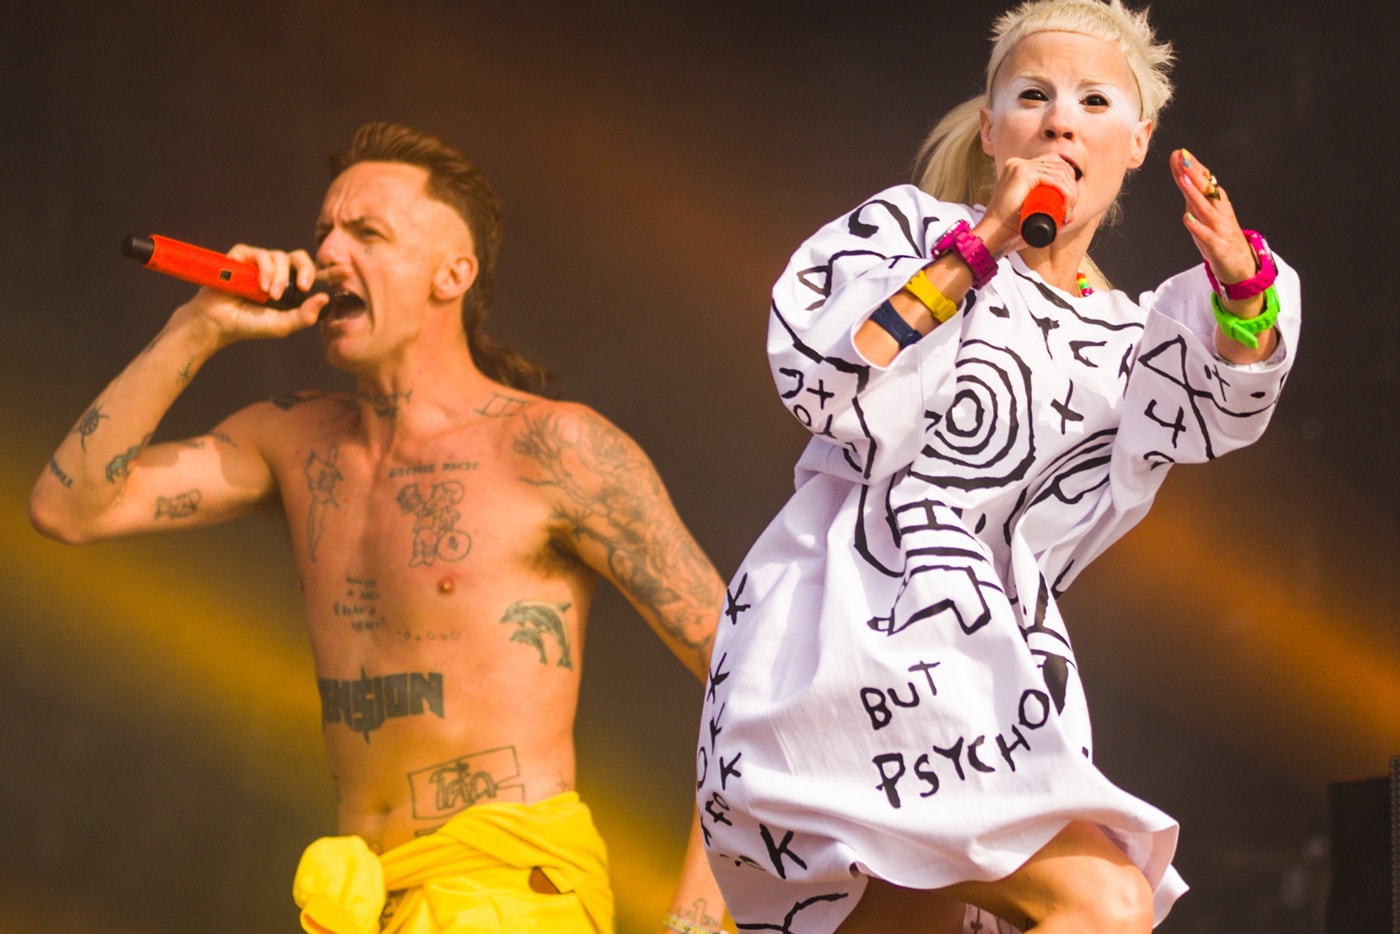 die-antwoord-suicide-squad-stole-style